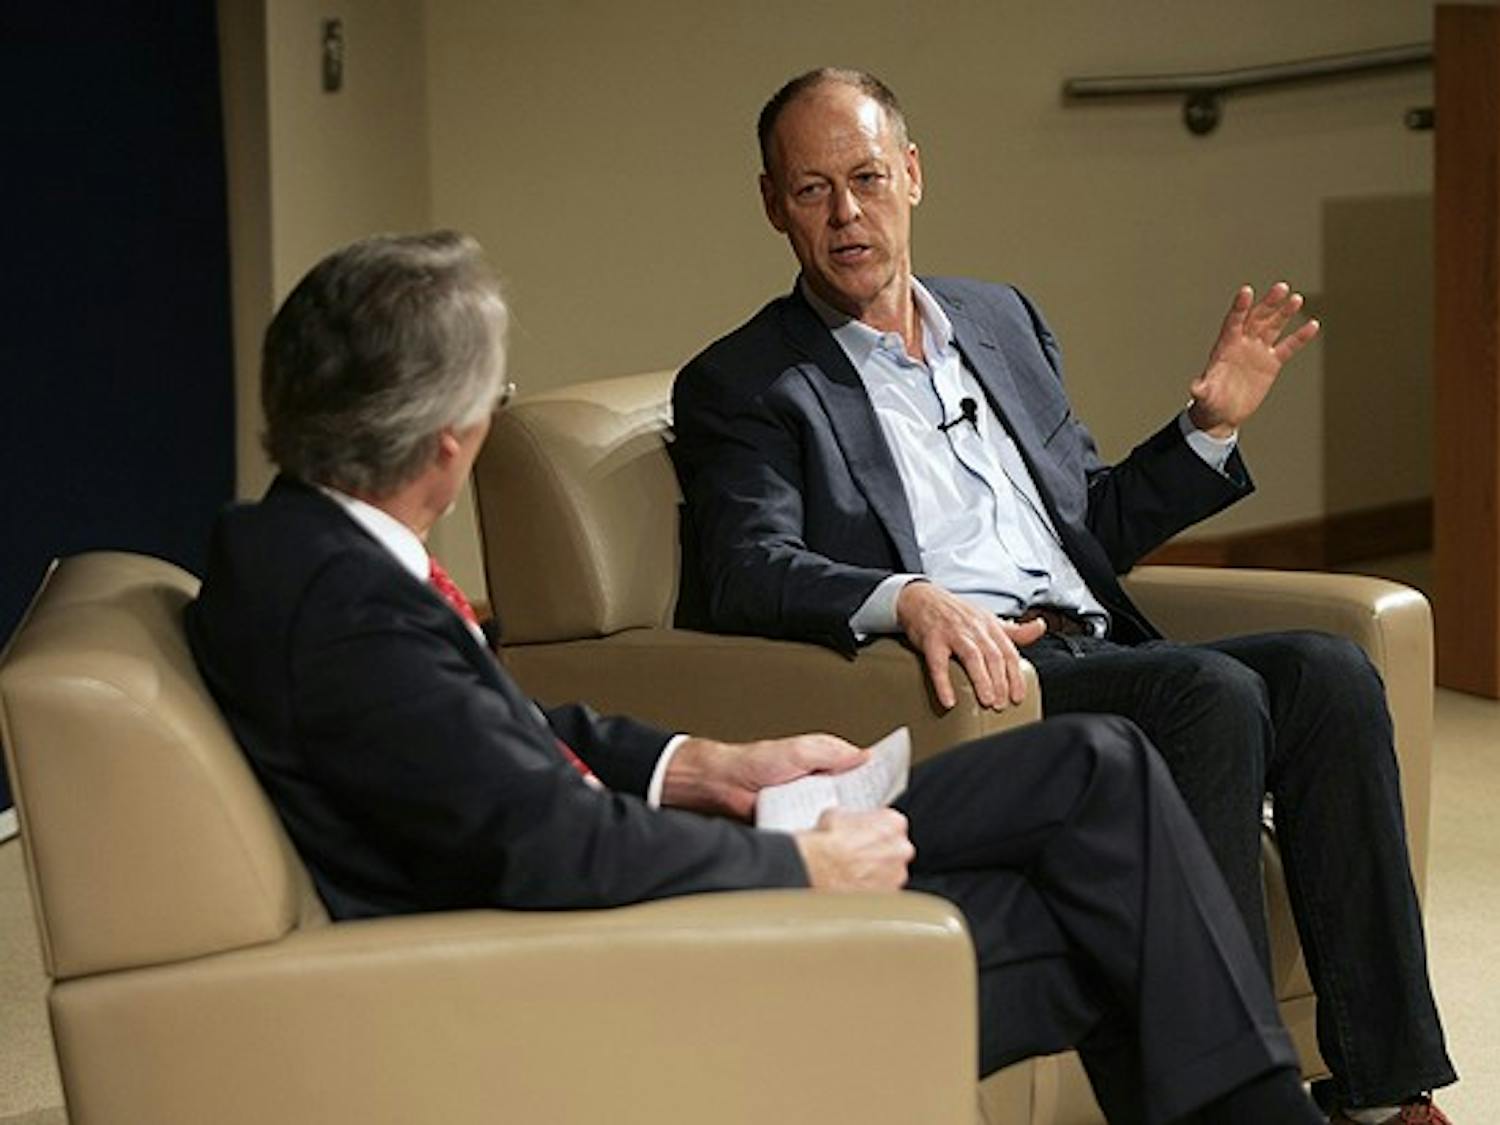 Whole Foods co-CEO Walter Robb speaks with Fuqua Business School Dean Bill Boulding about entrepreneurship Tuesday afternoon.